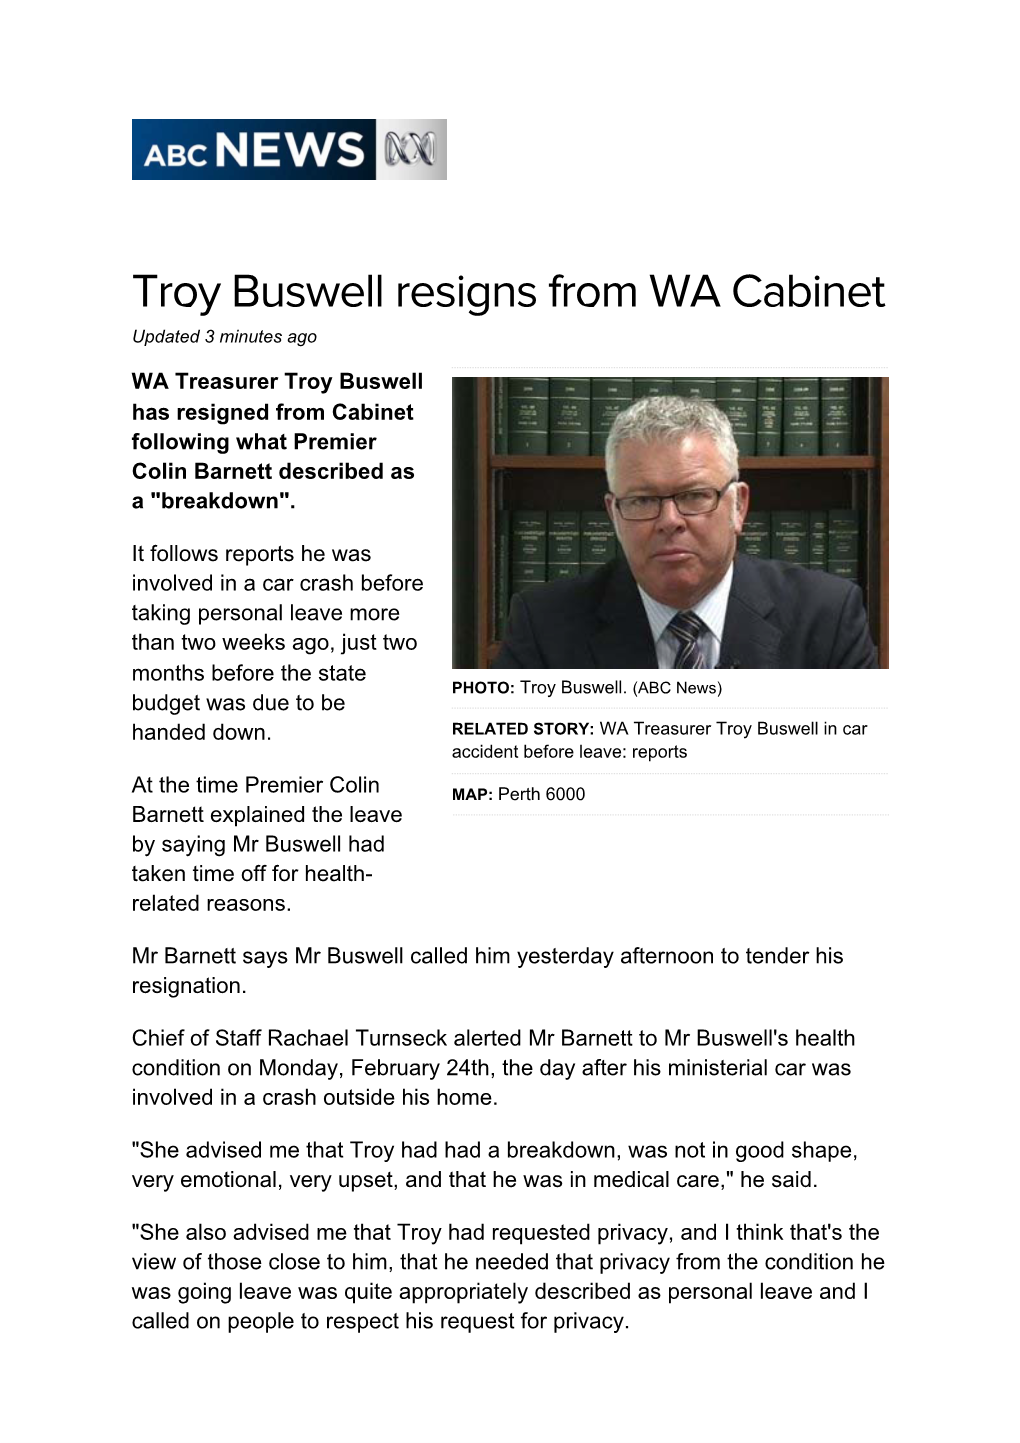 Troy Buswell Resigns from WA Cabinet Updated 3 Minutes Ago